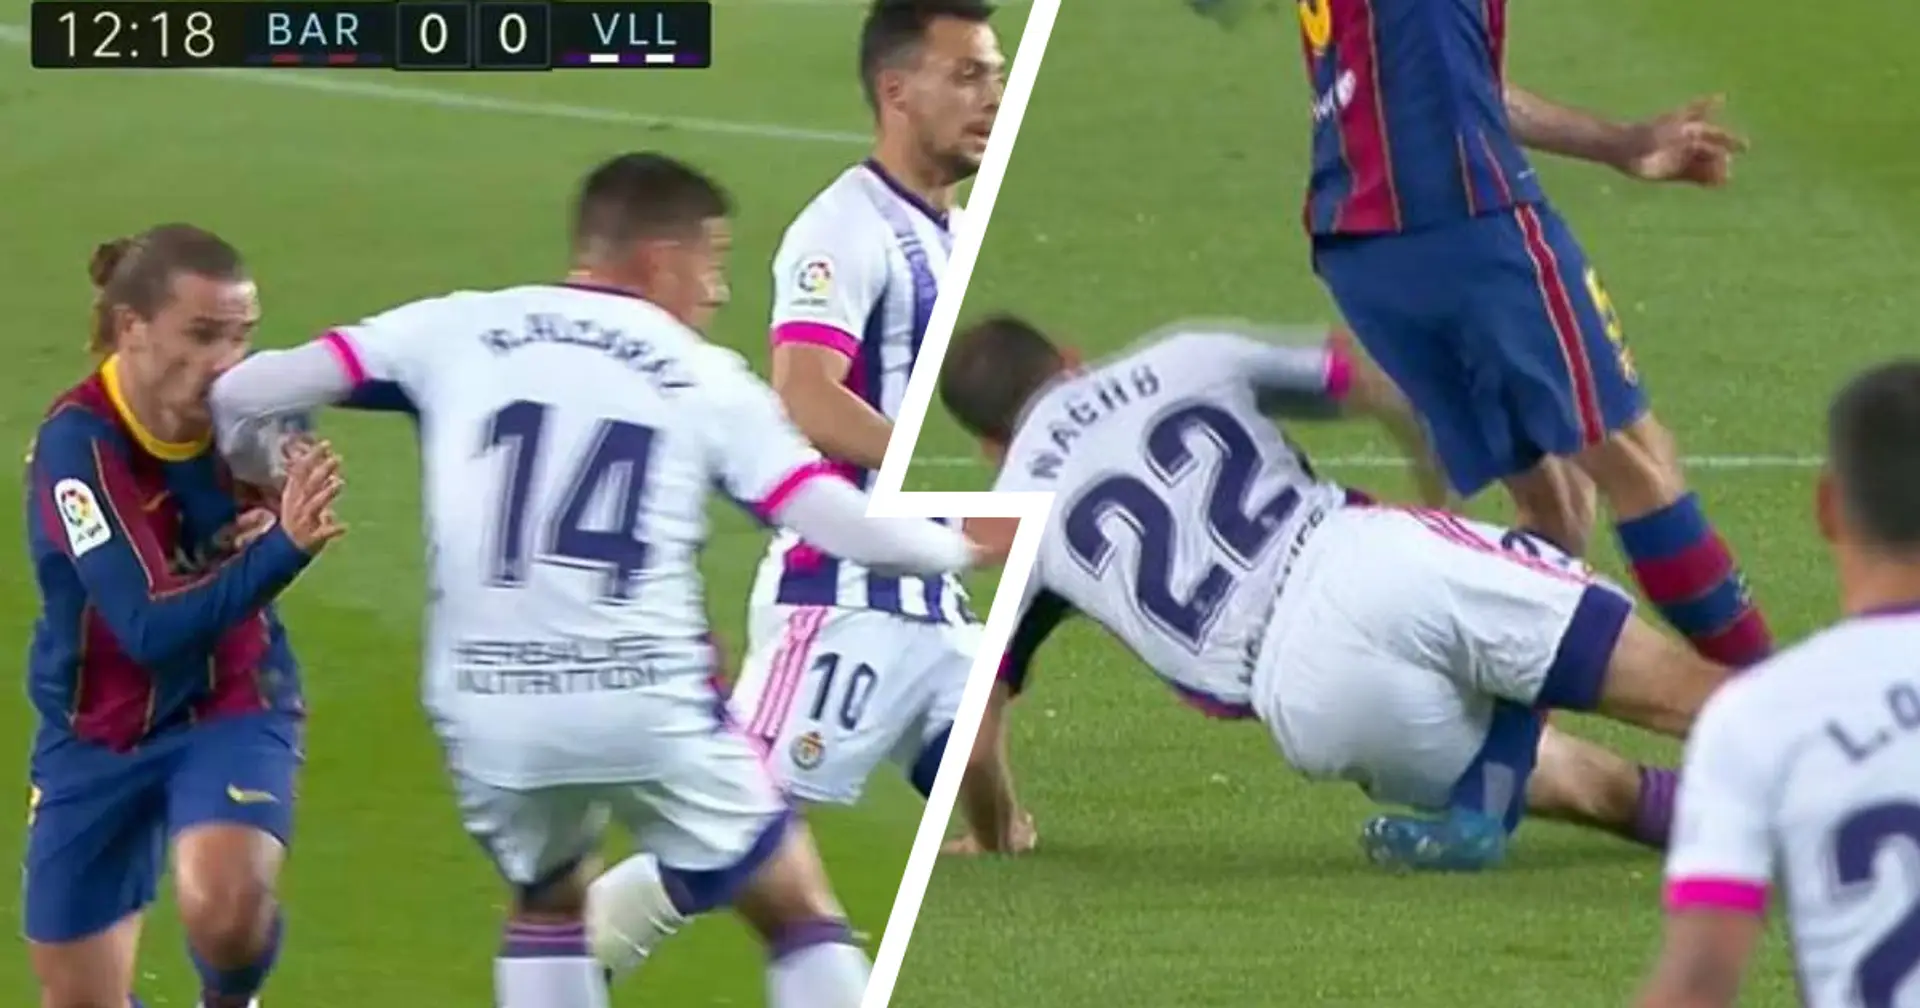 'How the f**k is Busquets still alive?': Barca fans react to unpunished actions by Valladolid in Camp Nou clash